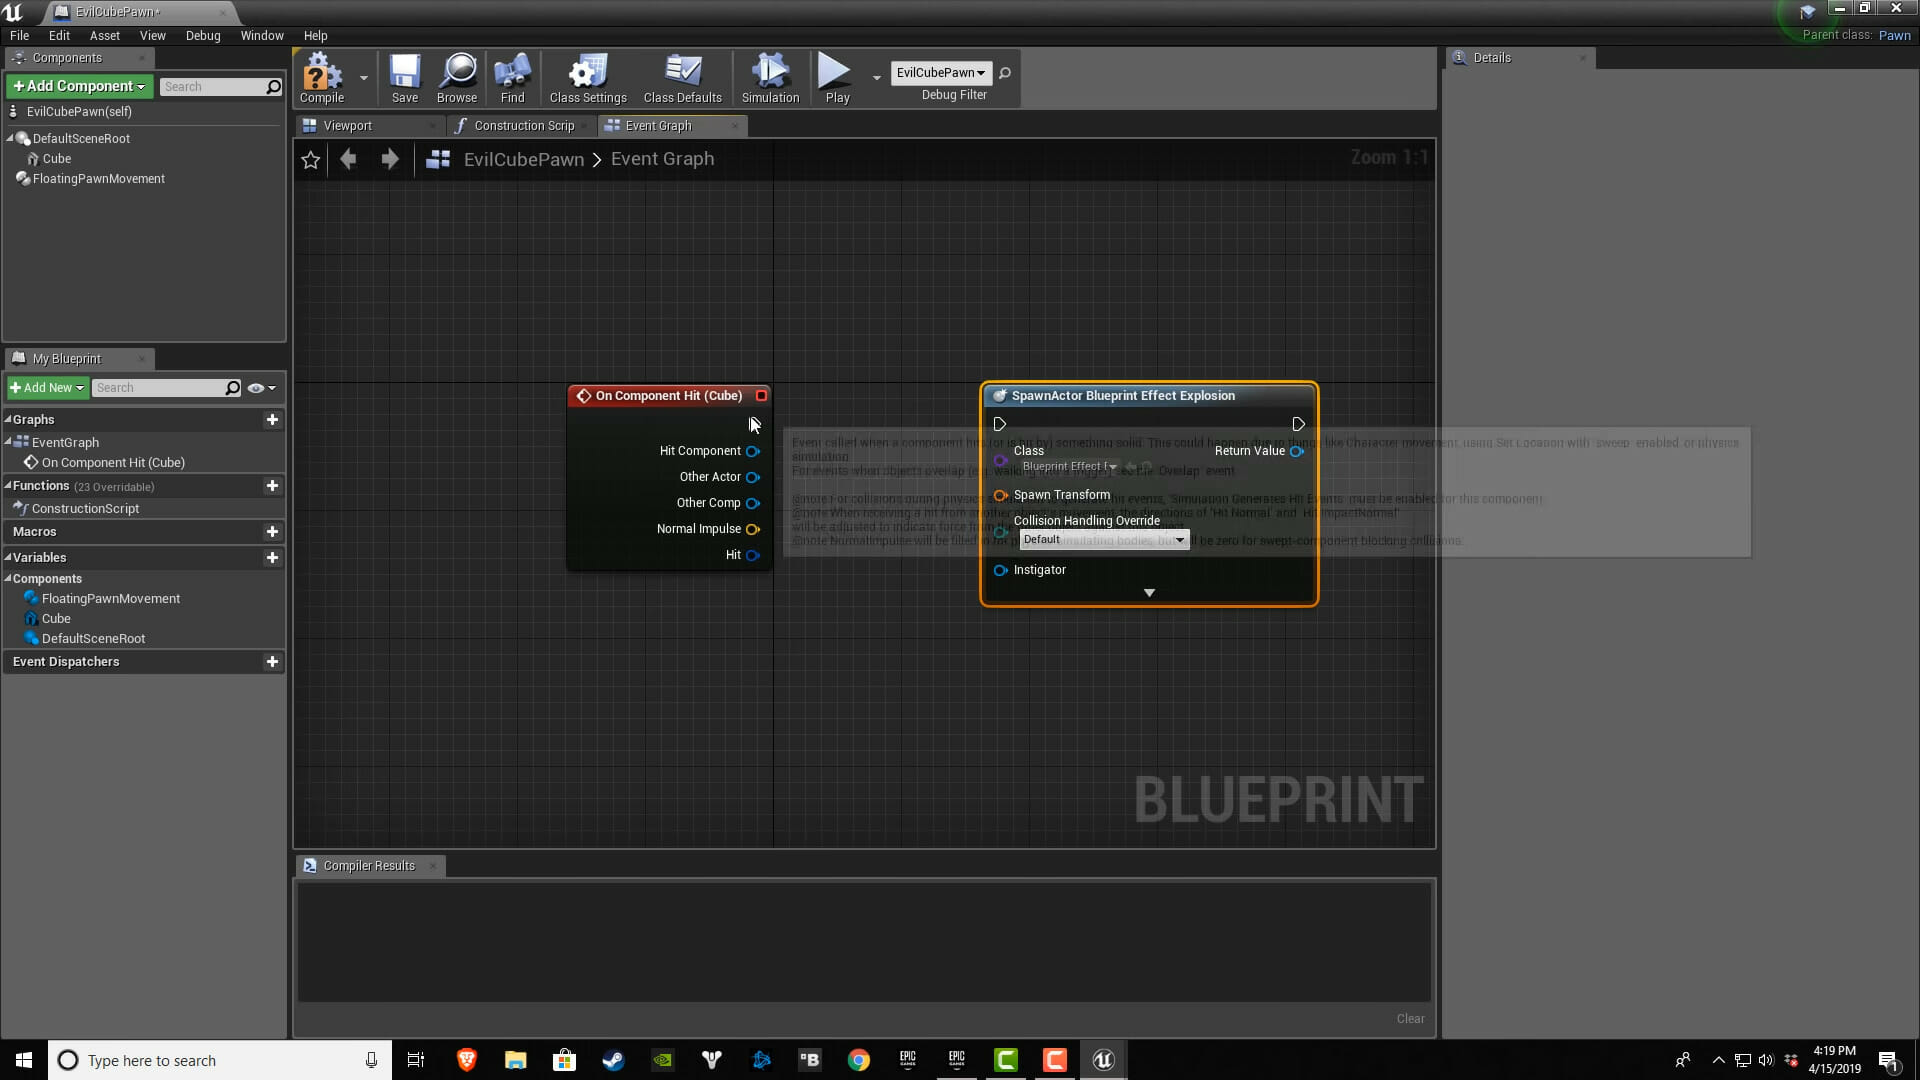 How to Use Unreal Engine?